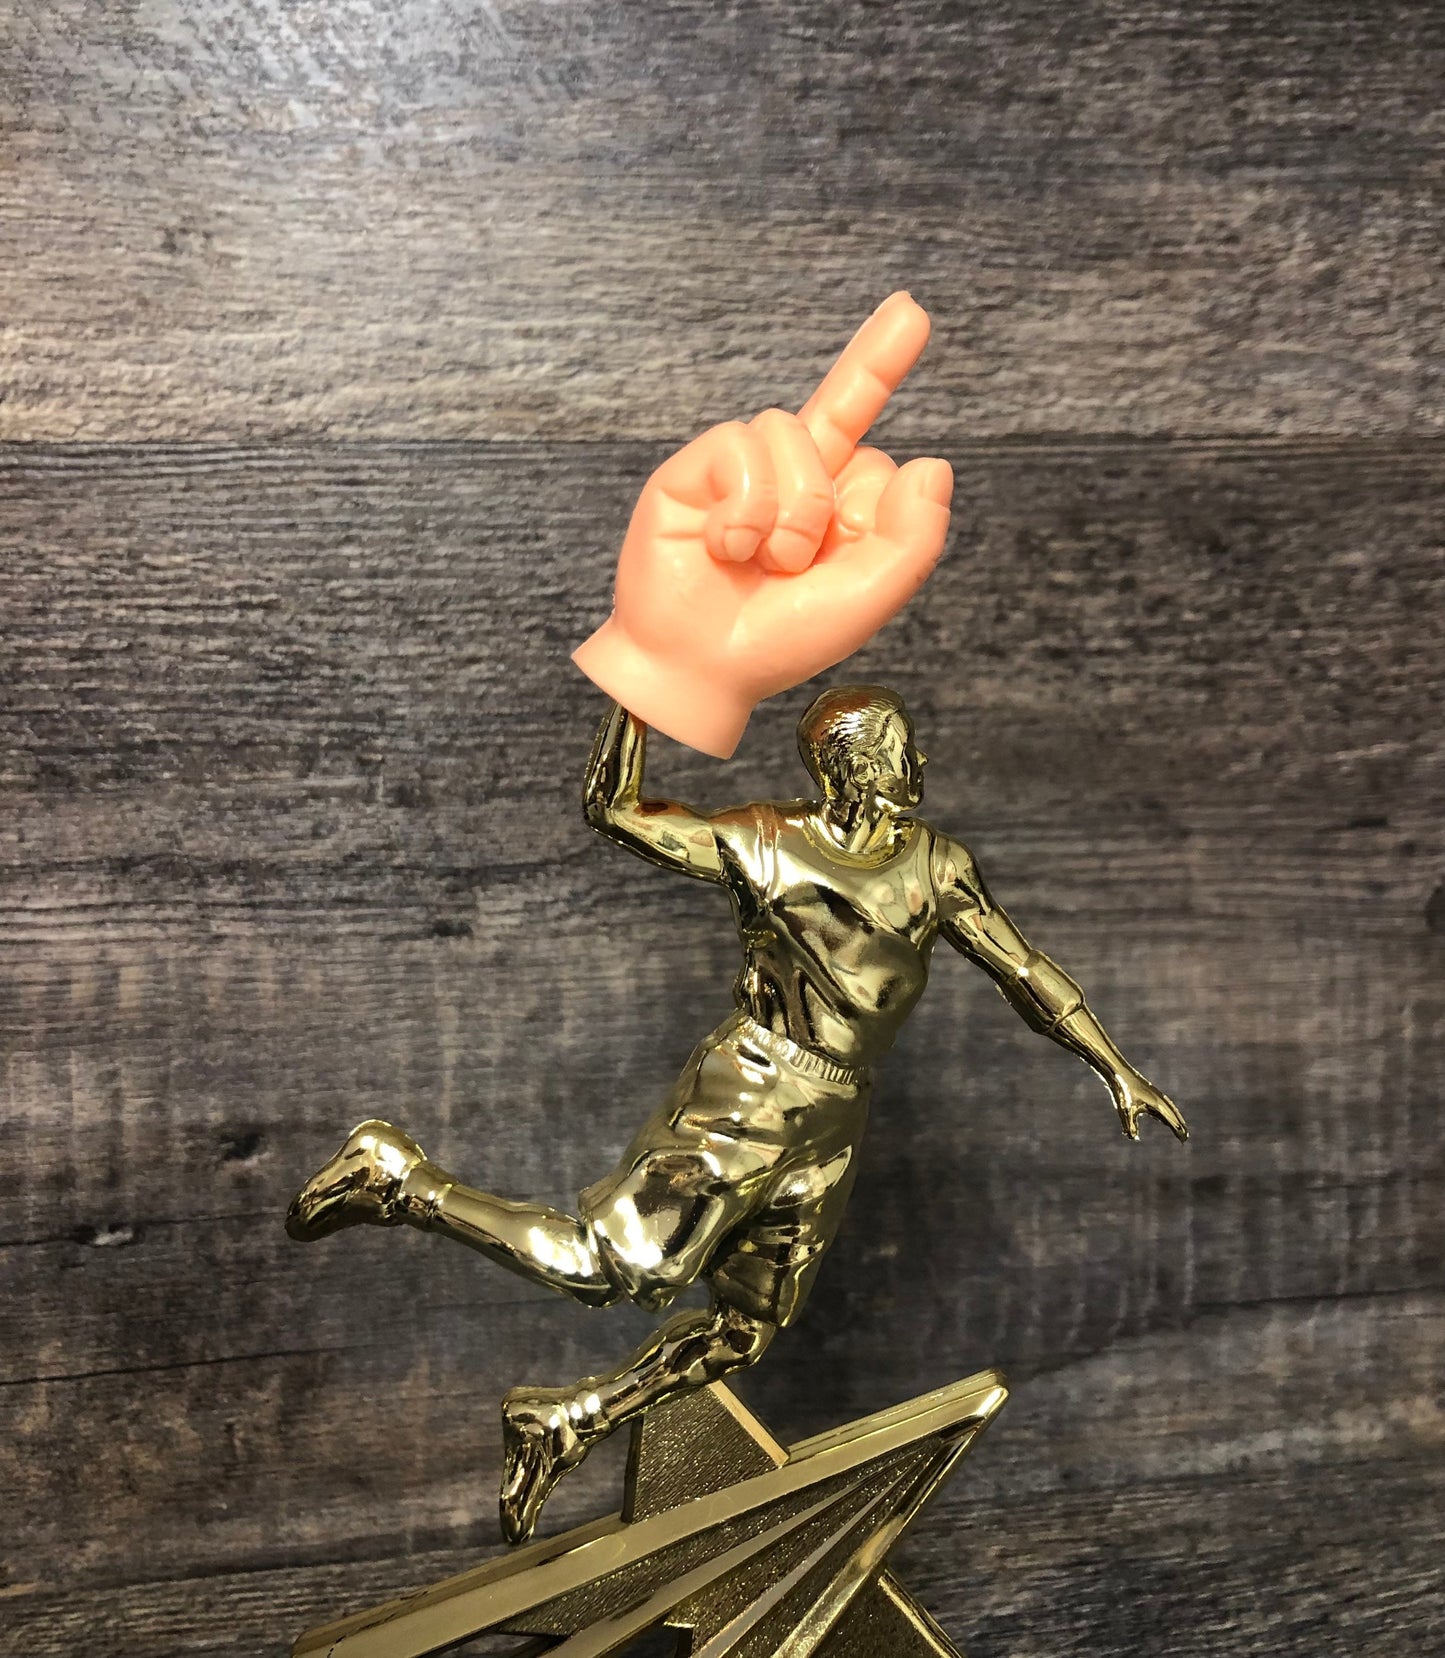 Basketball Trophy Funny Loser Trophy Middle Finger Gag Gift Adult Humor Funny Flipping The Bird F*ck You Trophy One Finger Two Words Award